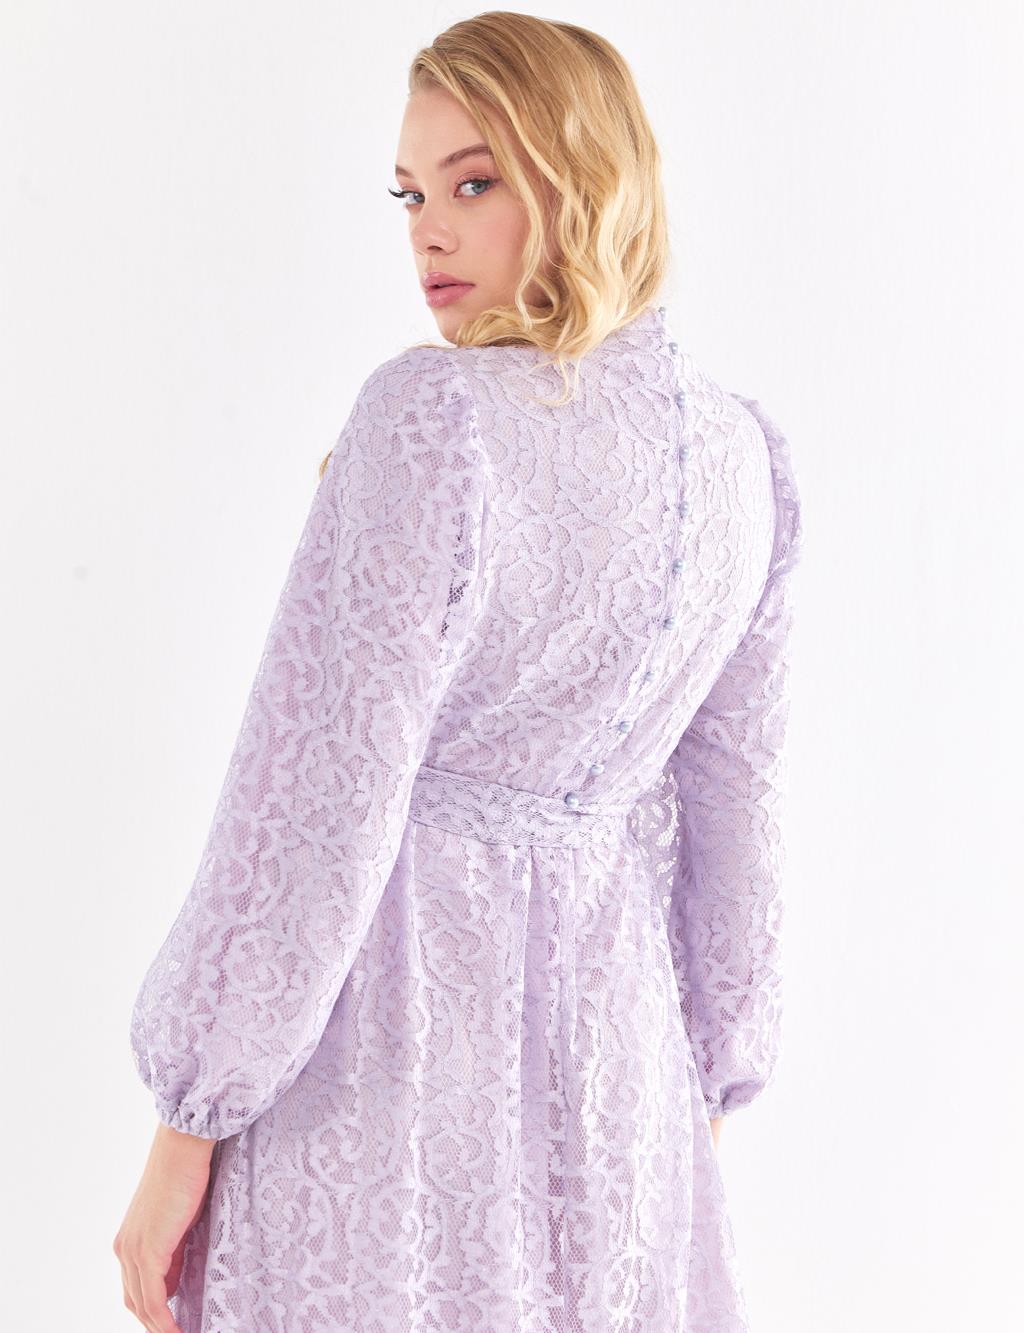 Belted Lace Dress Lilac